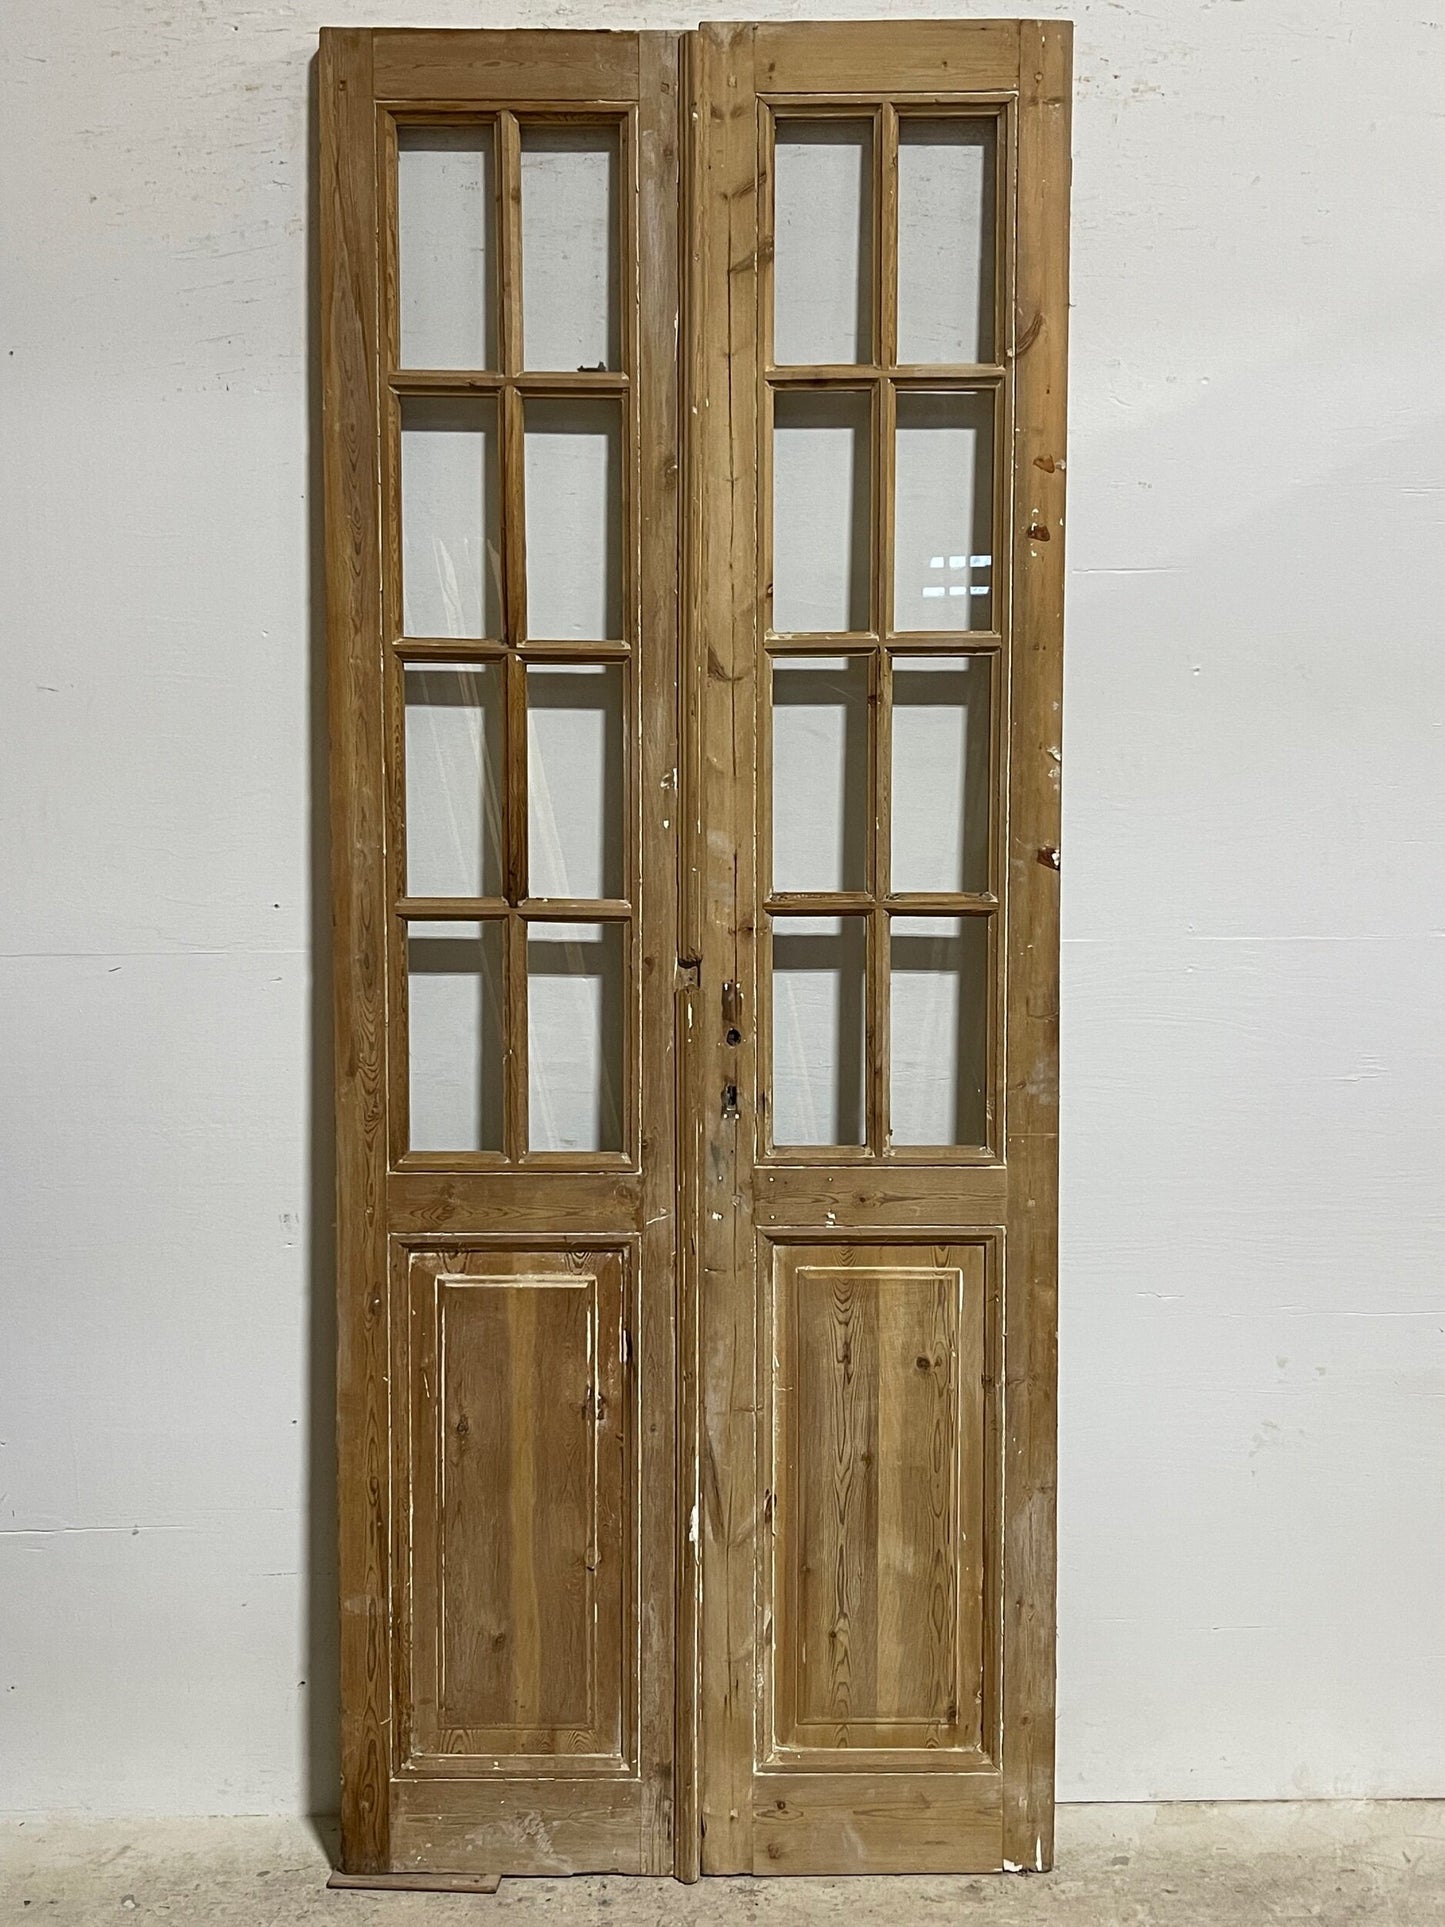 Antique french panel doors with glass (94 x 37) I040